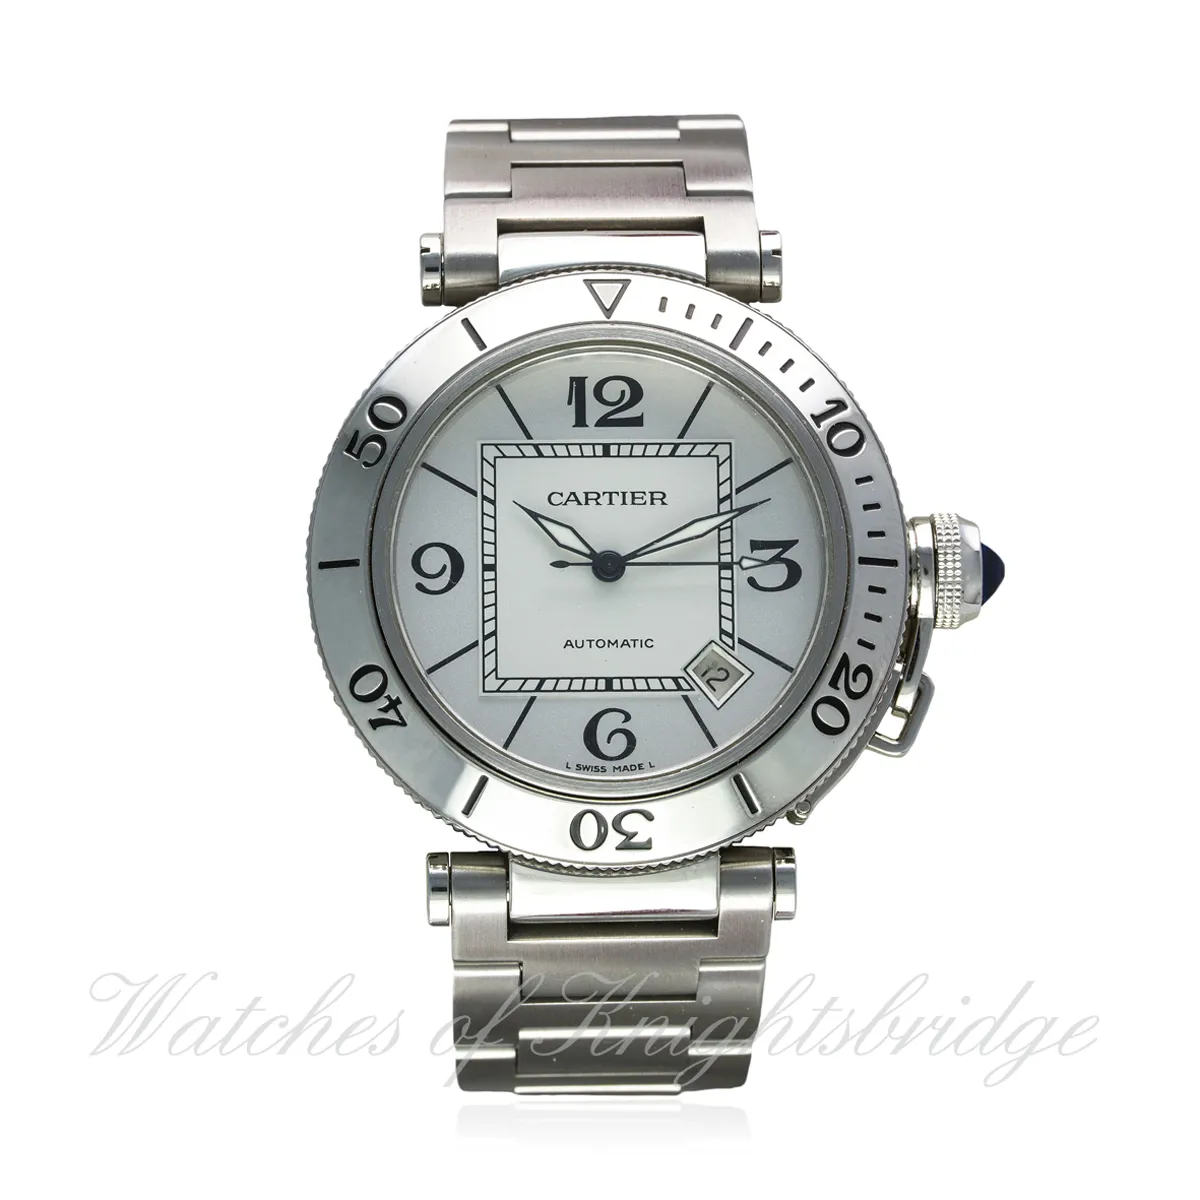 Cartier Pasha Seatimer 2790 40mm Stainless steel Grey